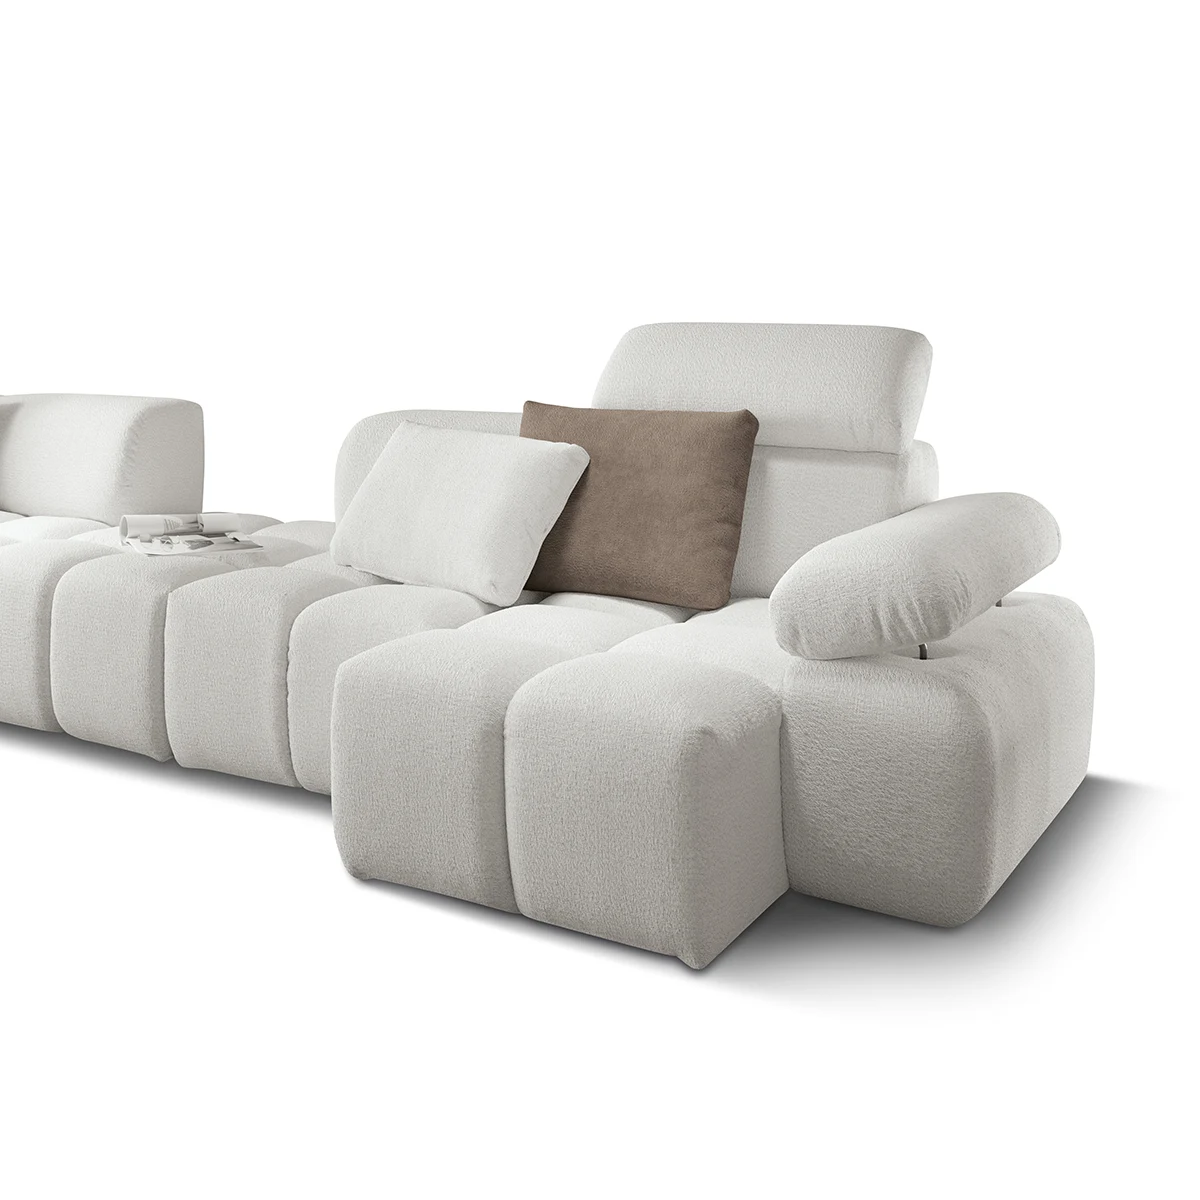 Soft sectional sofa system